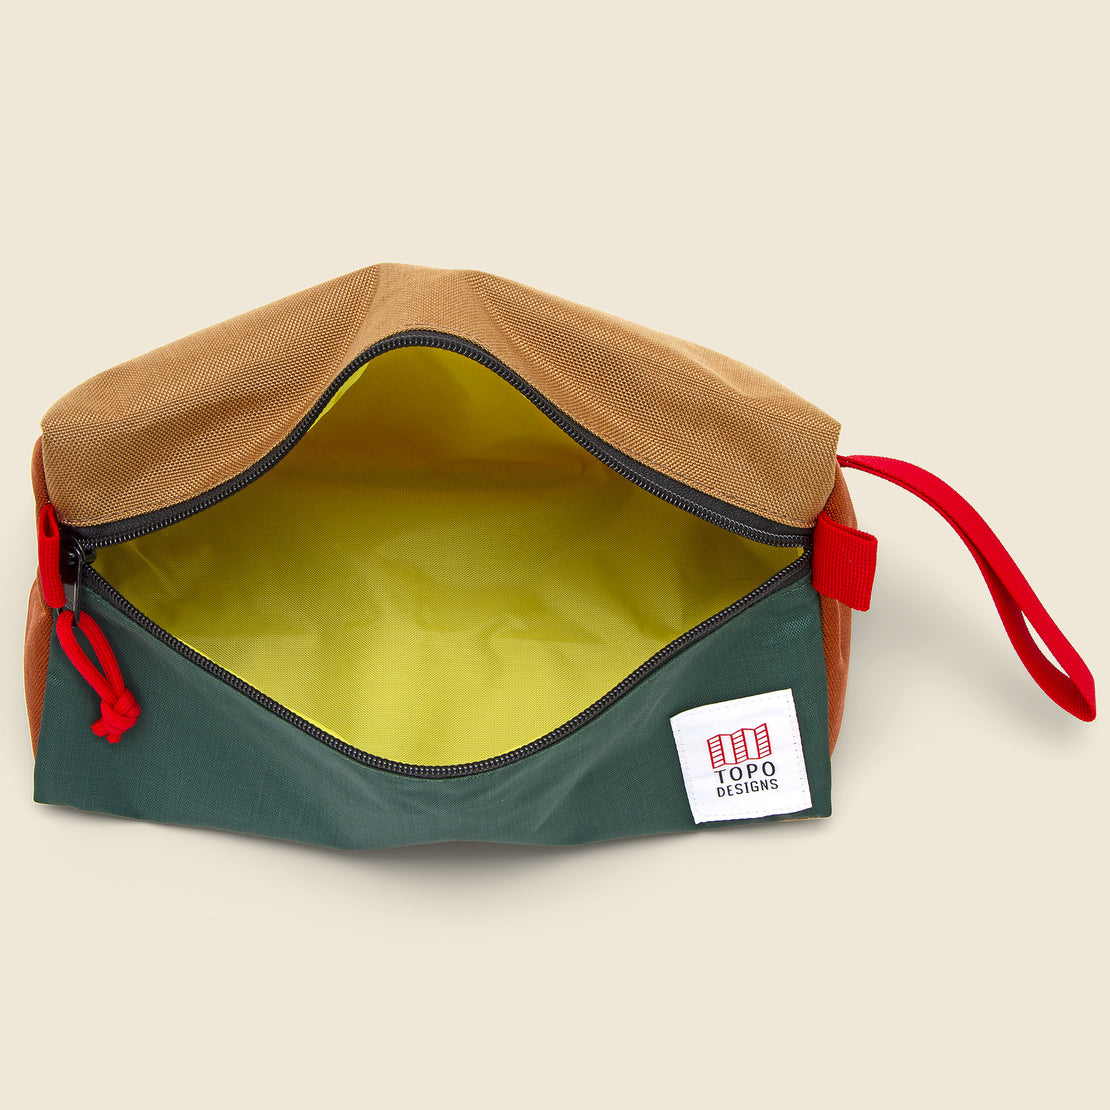 Dopp Kit - Forest/Khaki - Topo Designs - STAG Provisions - Accessories - Bags / Luggage